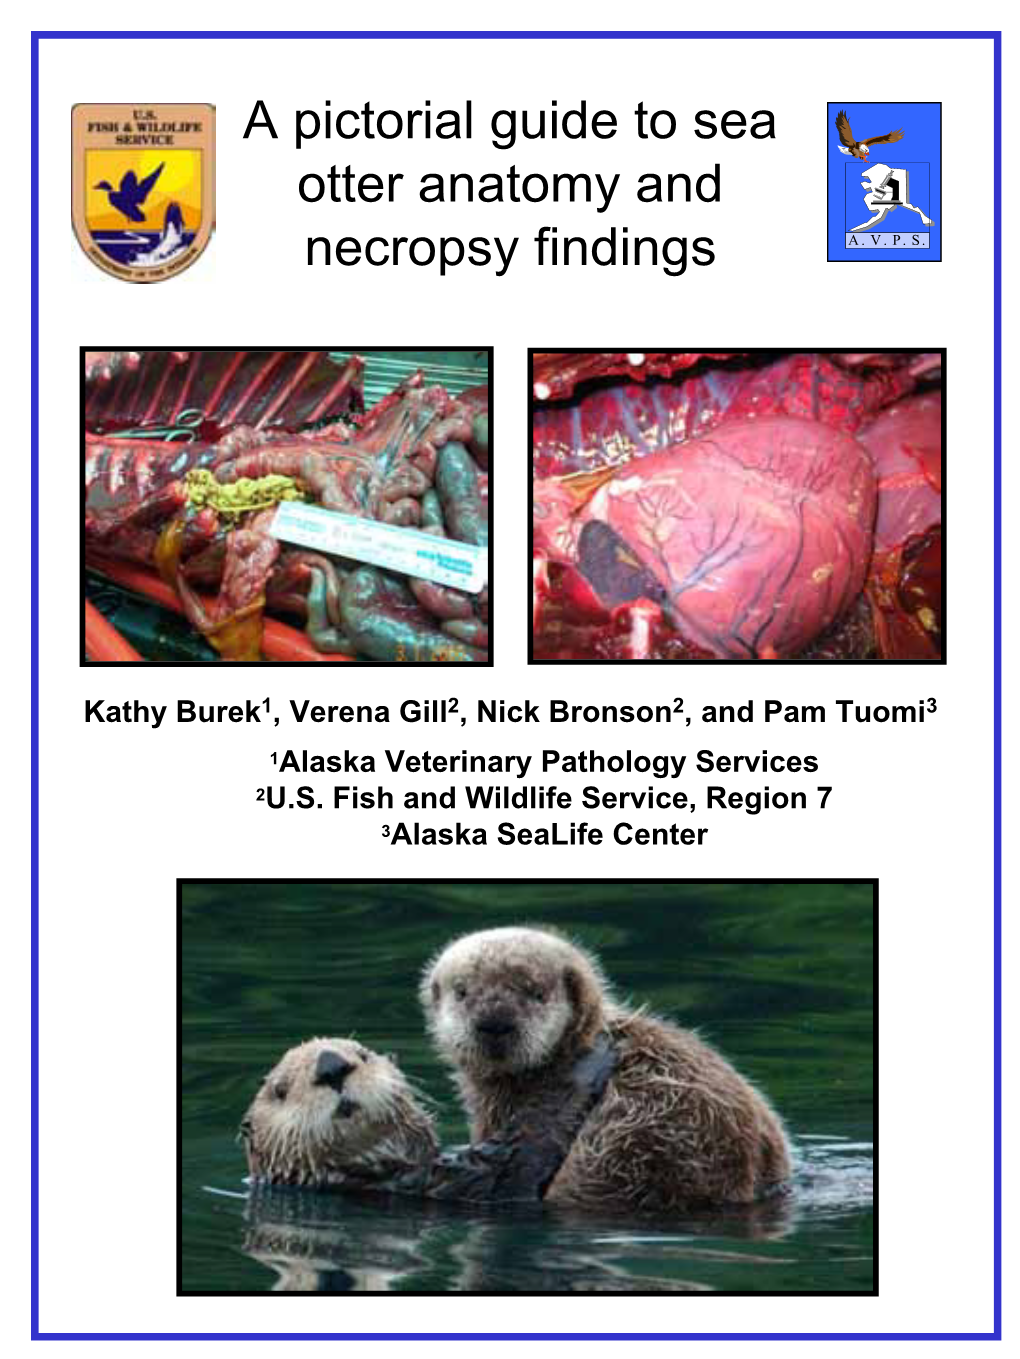 A Pictorial Guide to Sea Otter Anatomy and Necropsy Findings A